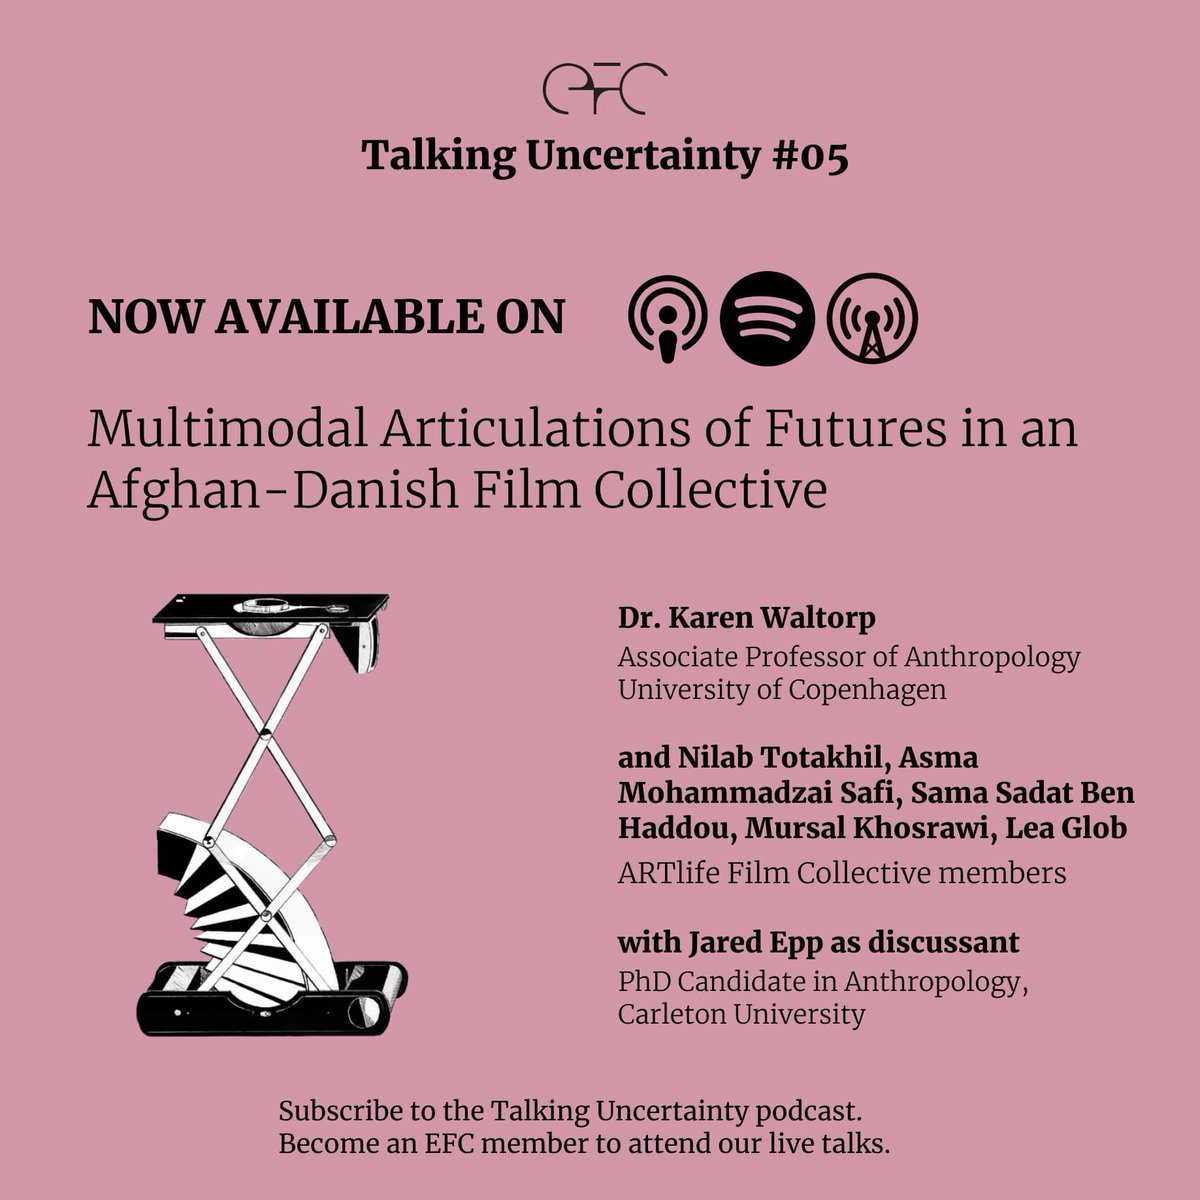 EFC's Talking Uncertainty #05 session 'Multimodal Articulations of Futures in an Afghan-Danish FilmCollective' with Dr. @karenWaltorp, Nilab Totakhil, Asma Mohammadzai Safi, Sama Sadat Ben Haddou, Mursal Khosrawi, Lea Glob & Jared Epp is now available as a podcast! #anthrotwitter